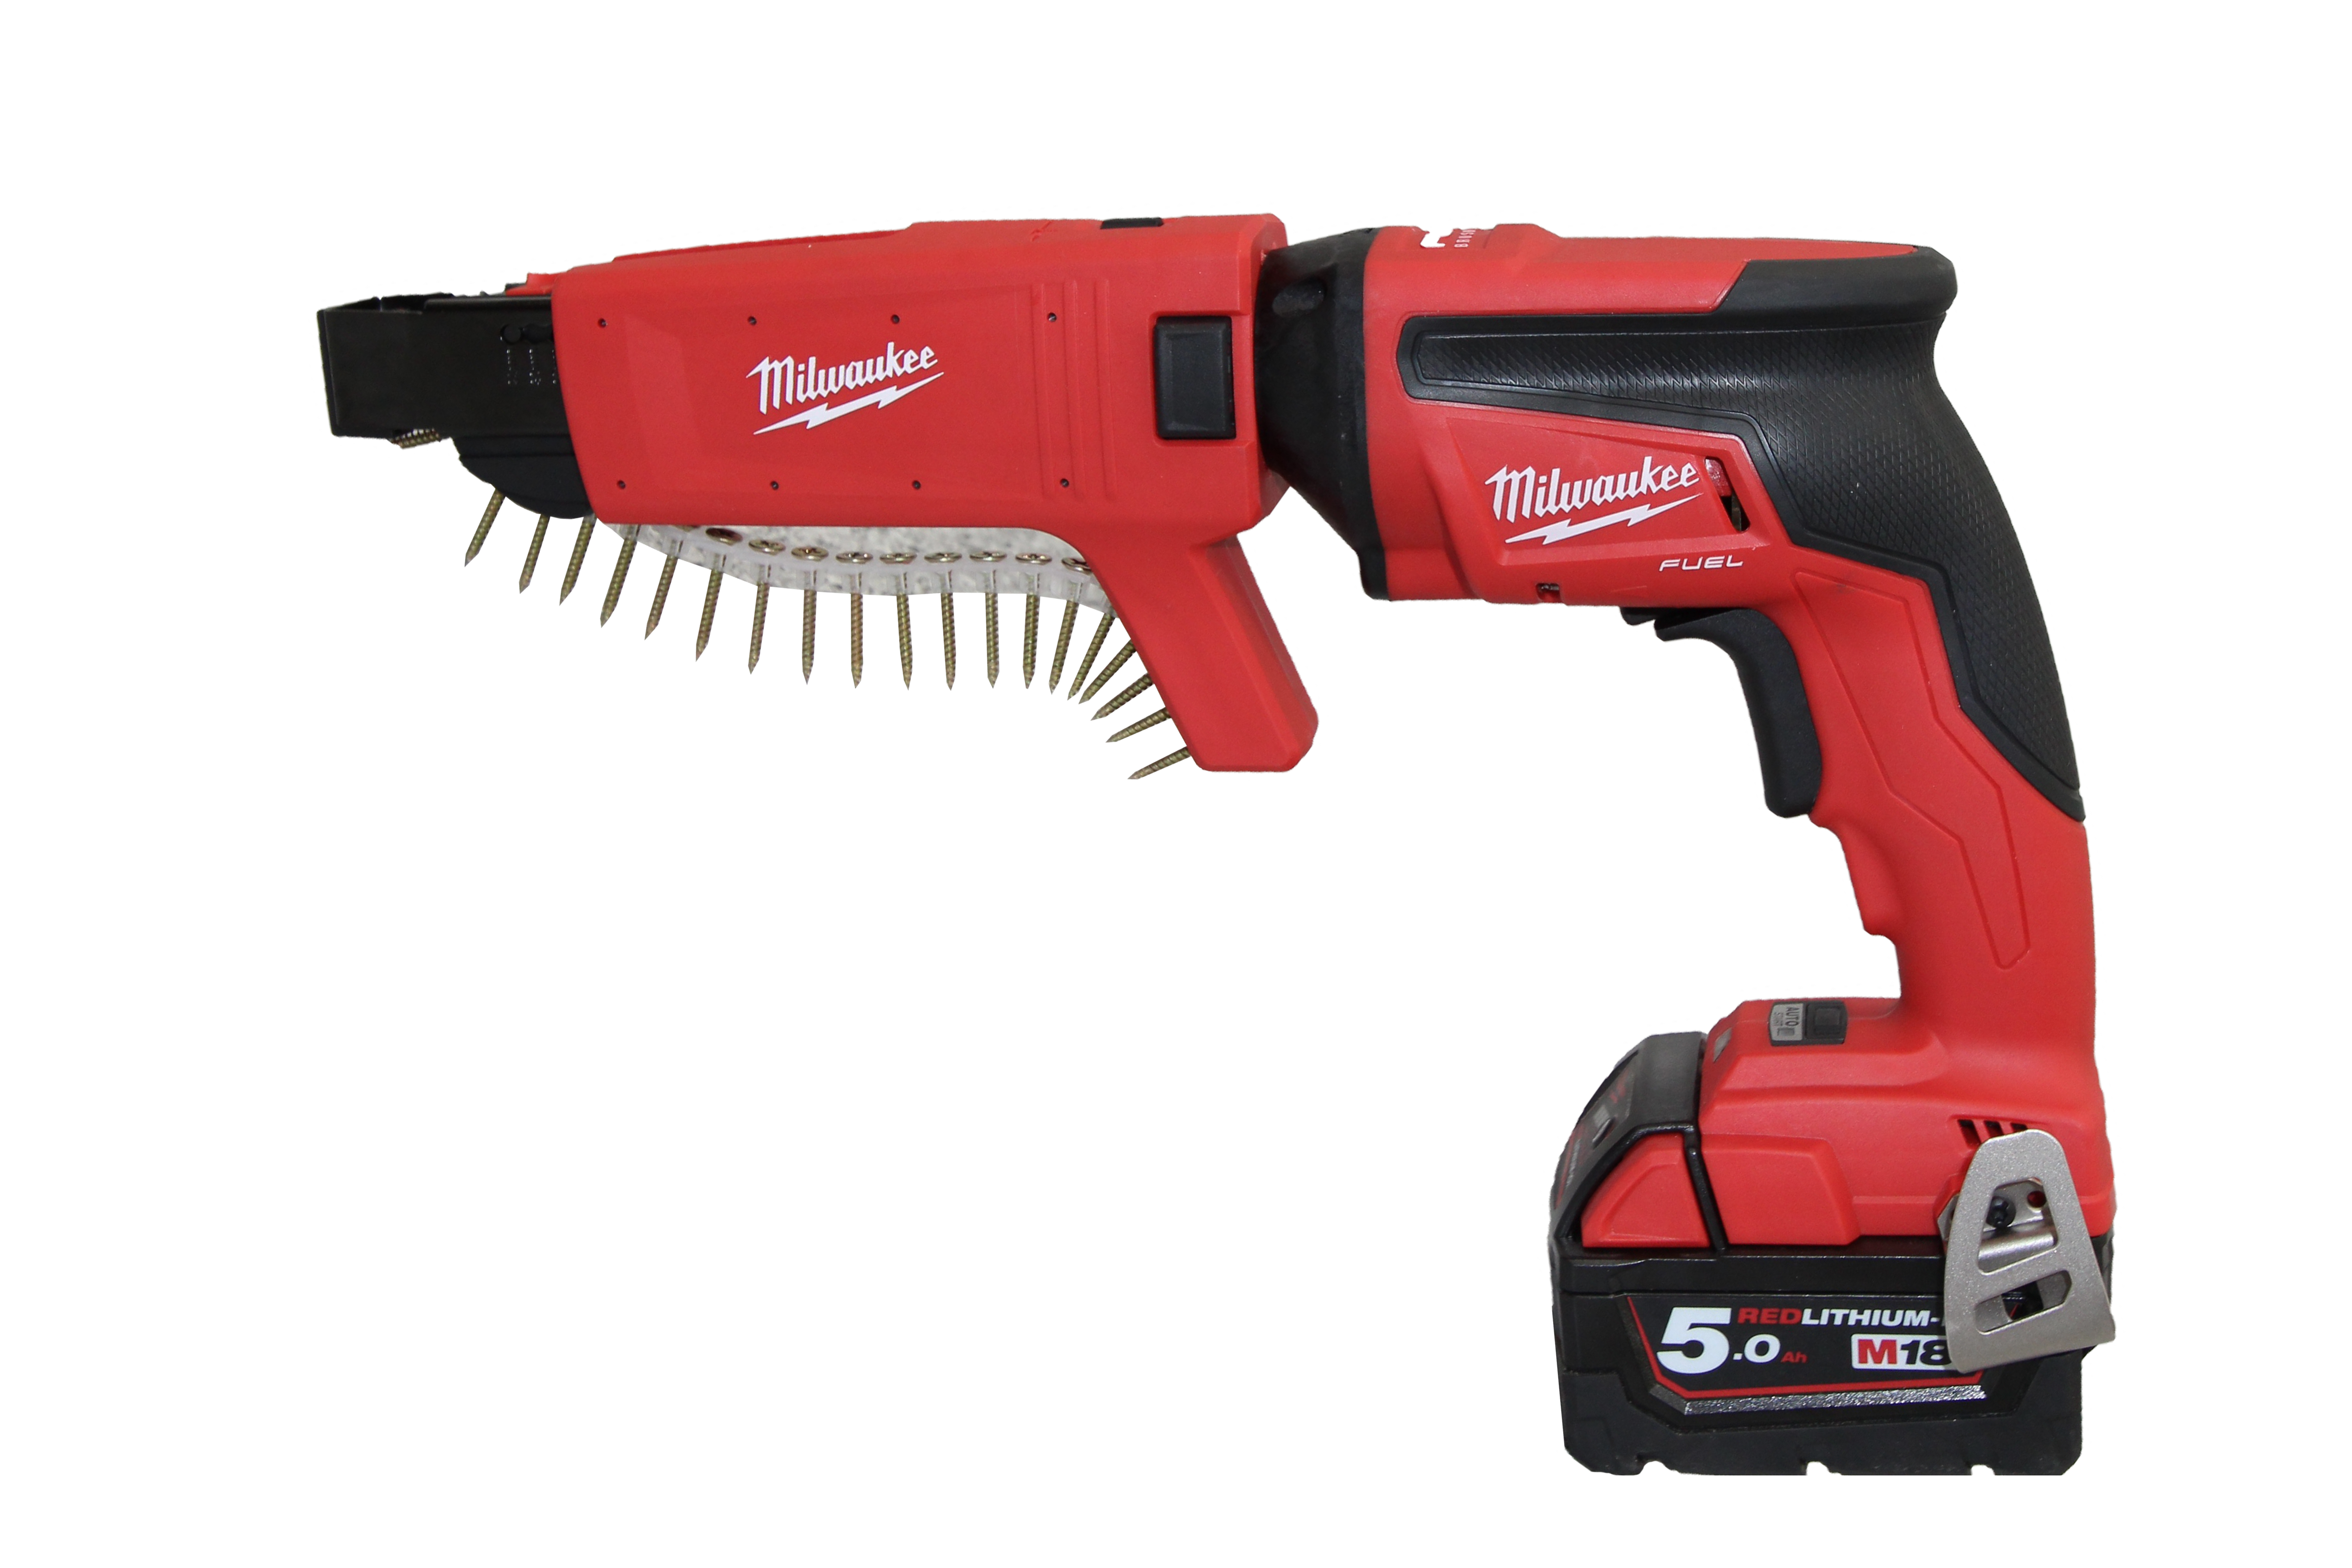 M18 Fuel Collated Drywall Screw Gun​ - Skin Only